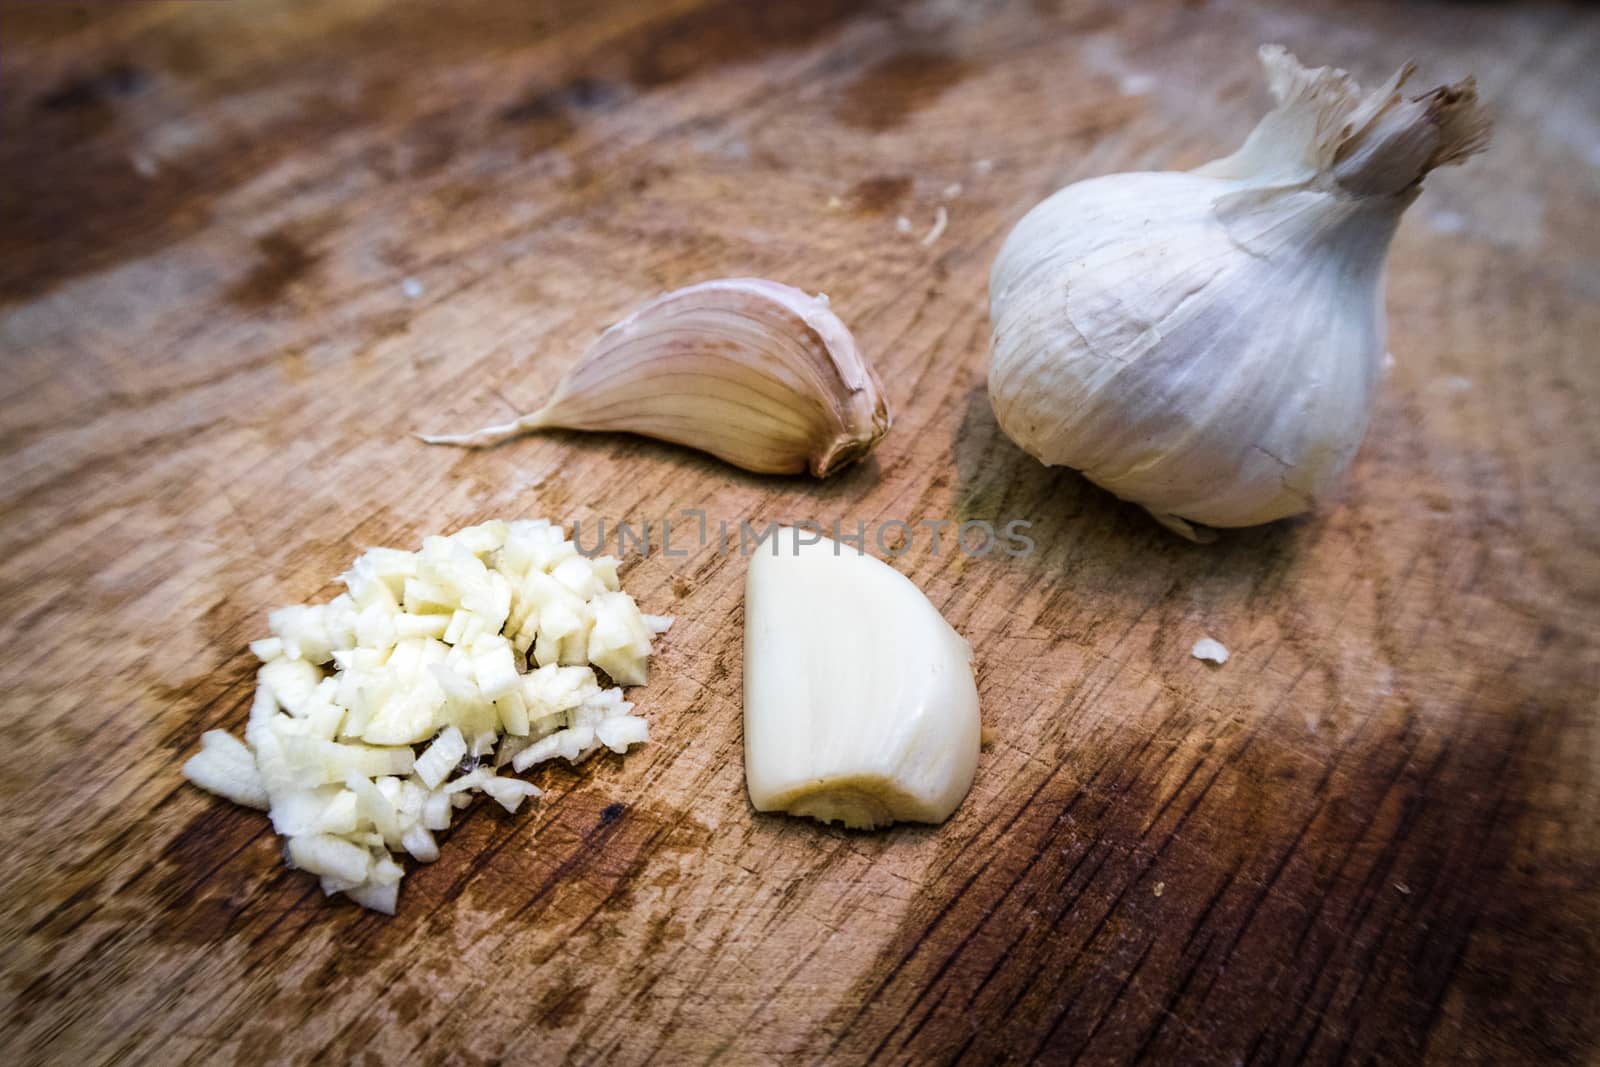 Garlic being chopped at different stage of the chopping process.